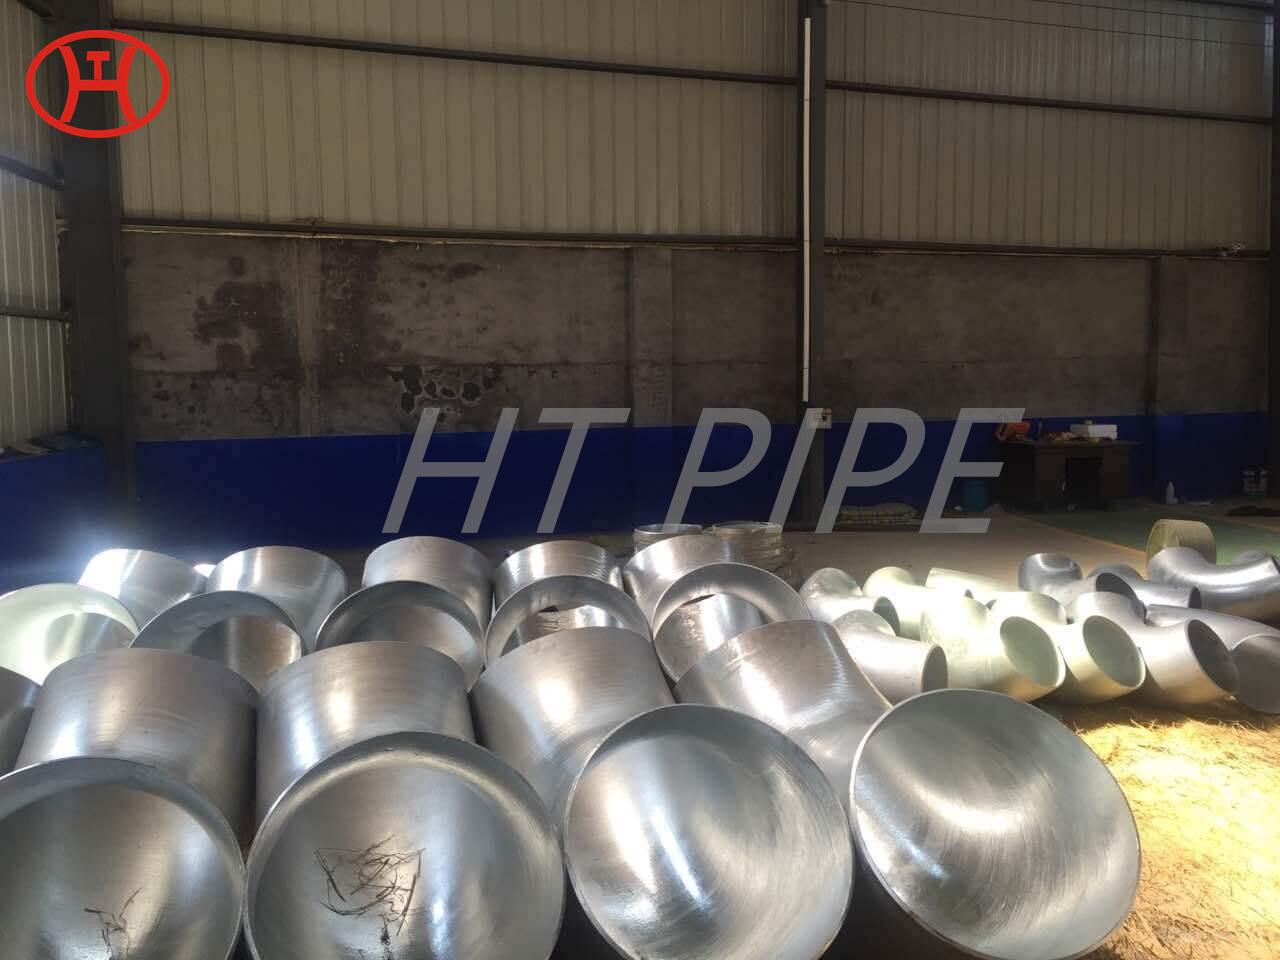 316L stainless steel seamless pipe connectors S30400 elbows fittings